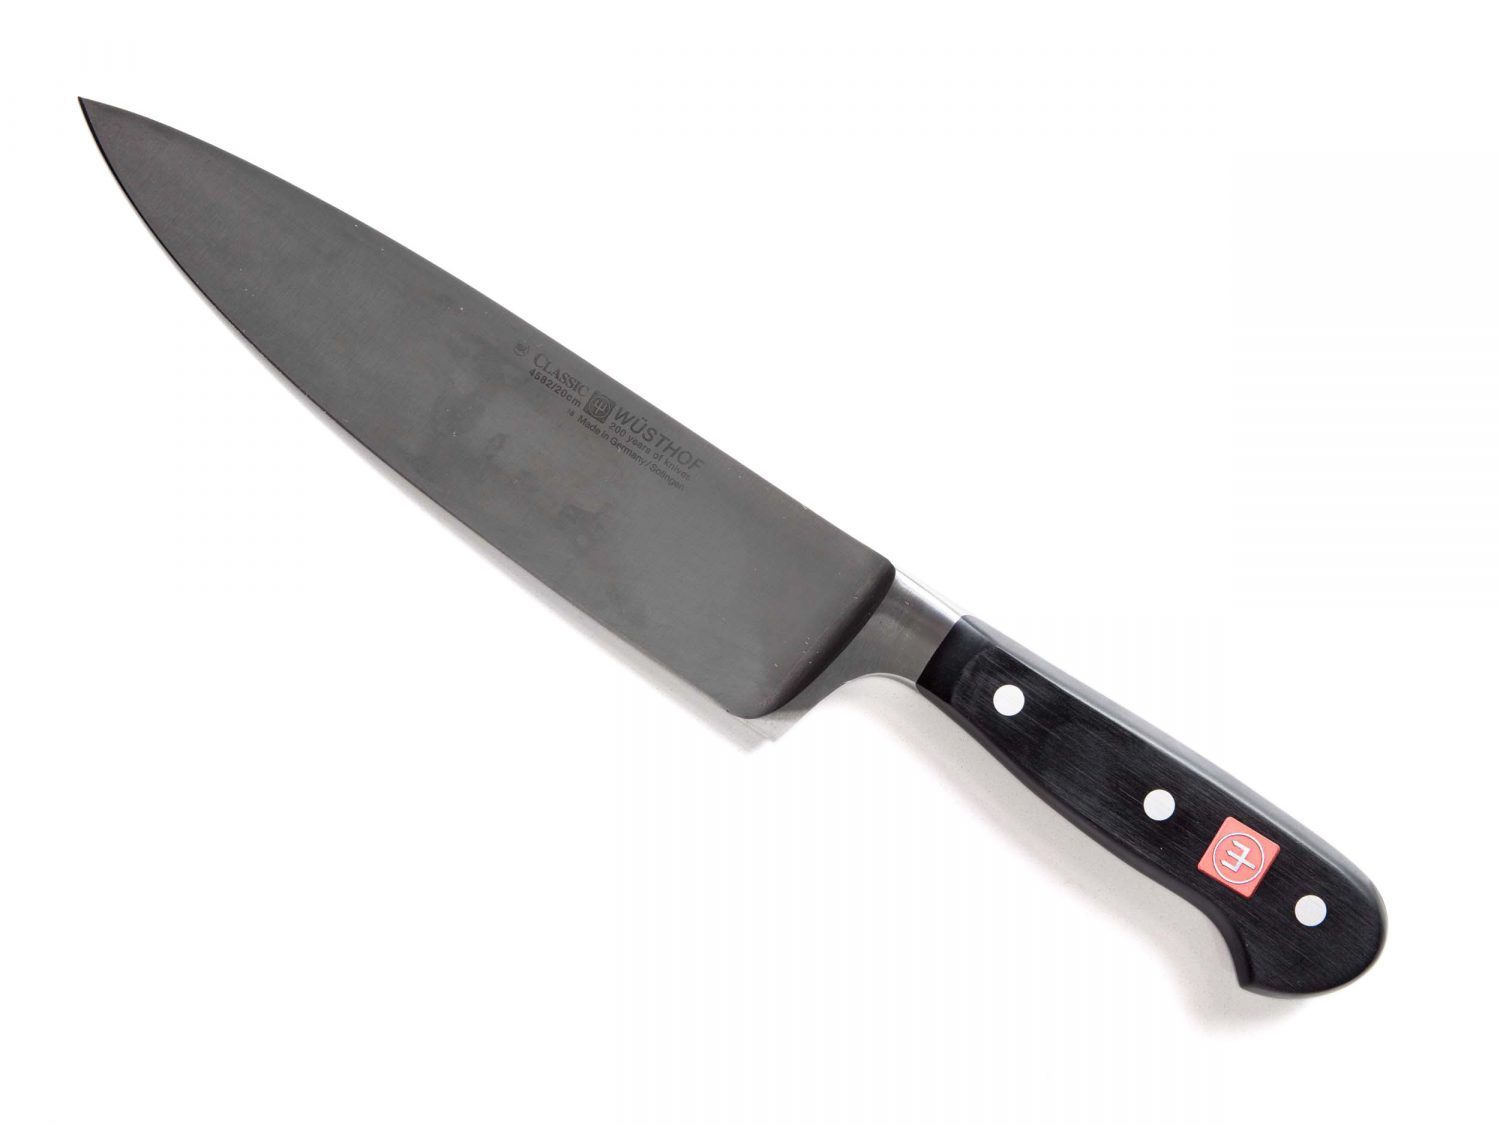 The Wüsthof Classic, a high-end Western-style chef's knife